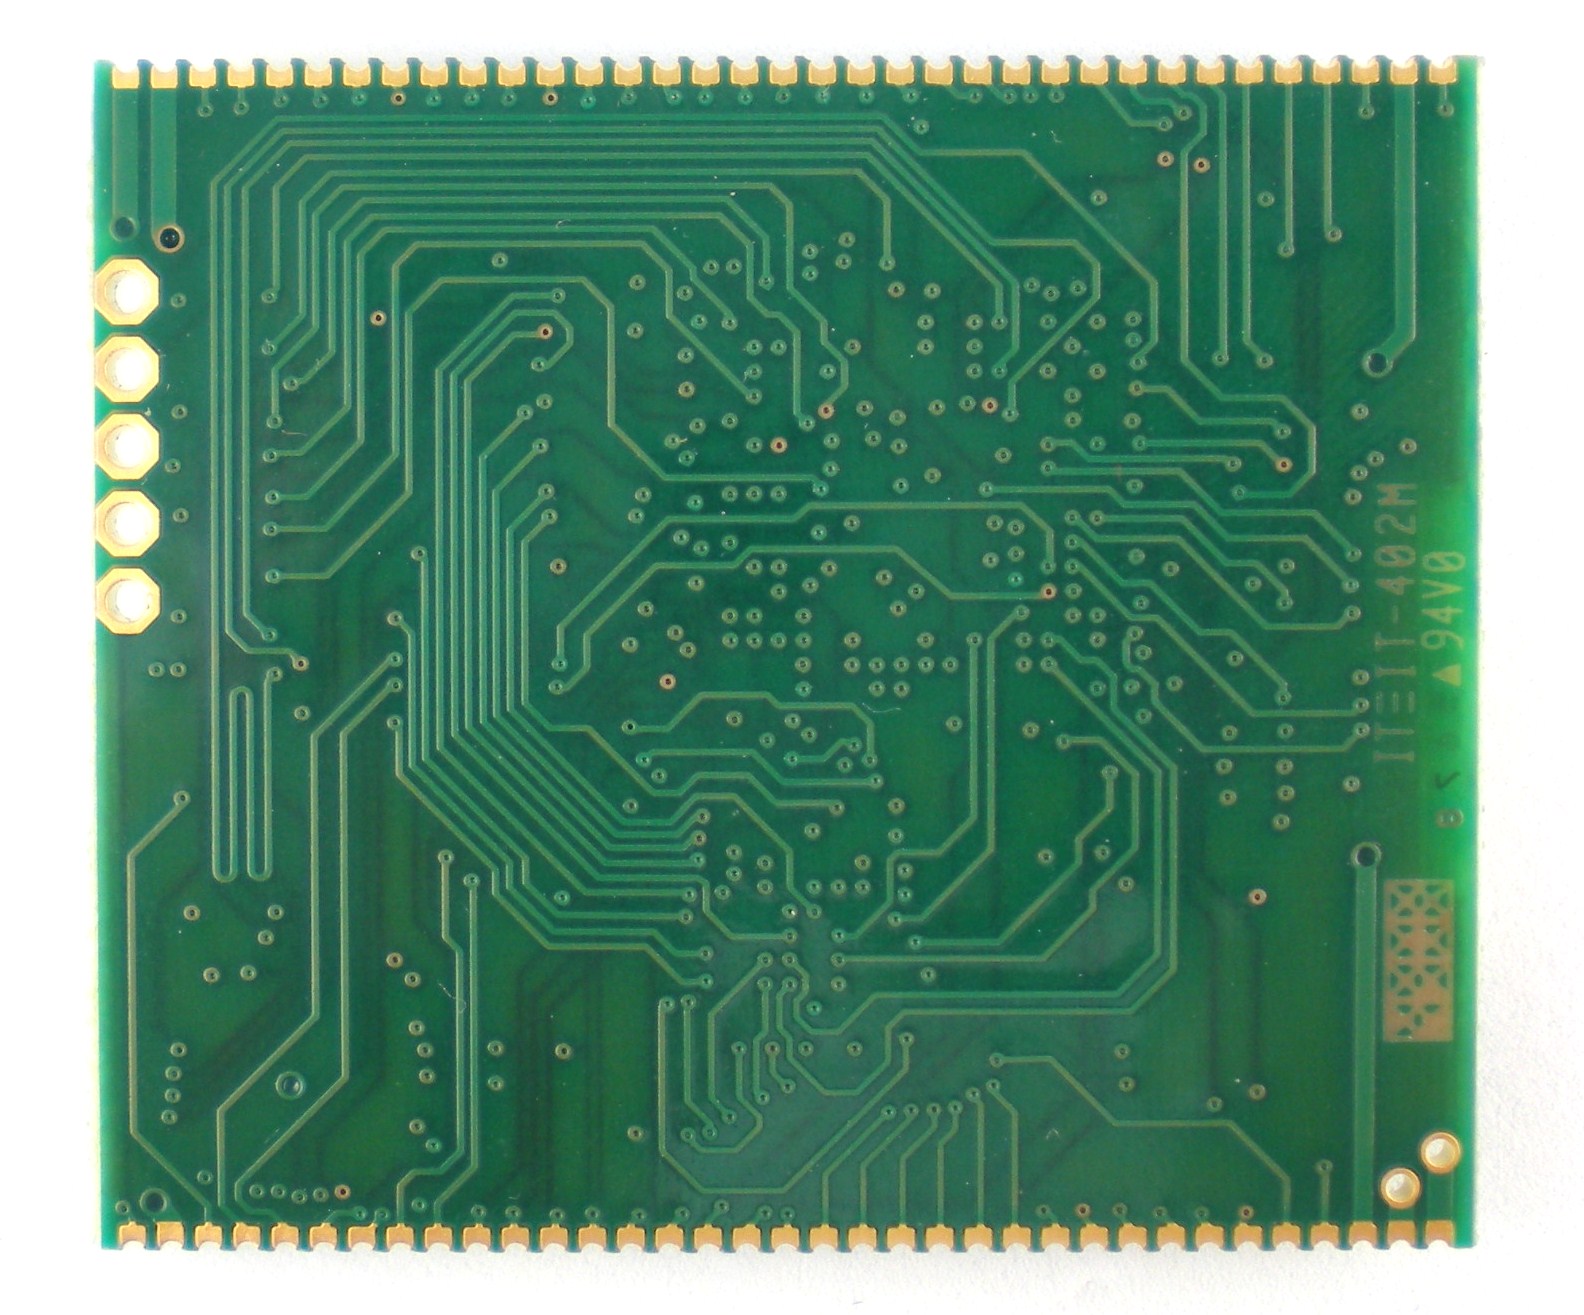  What is Prototype PCB Assembly